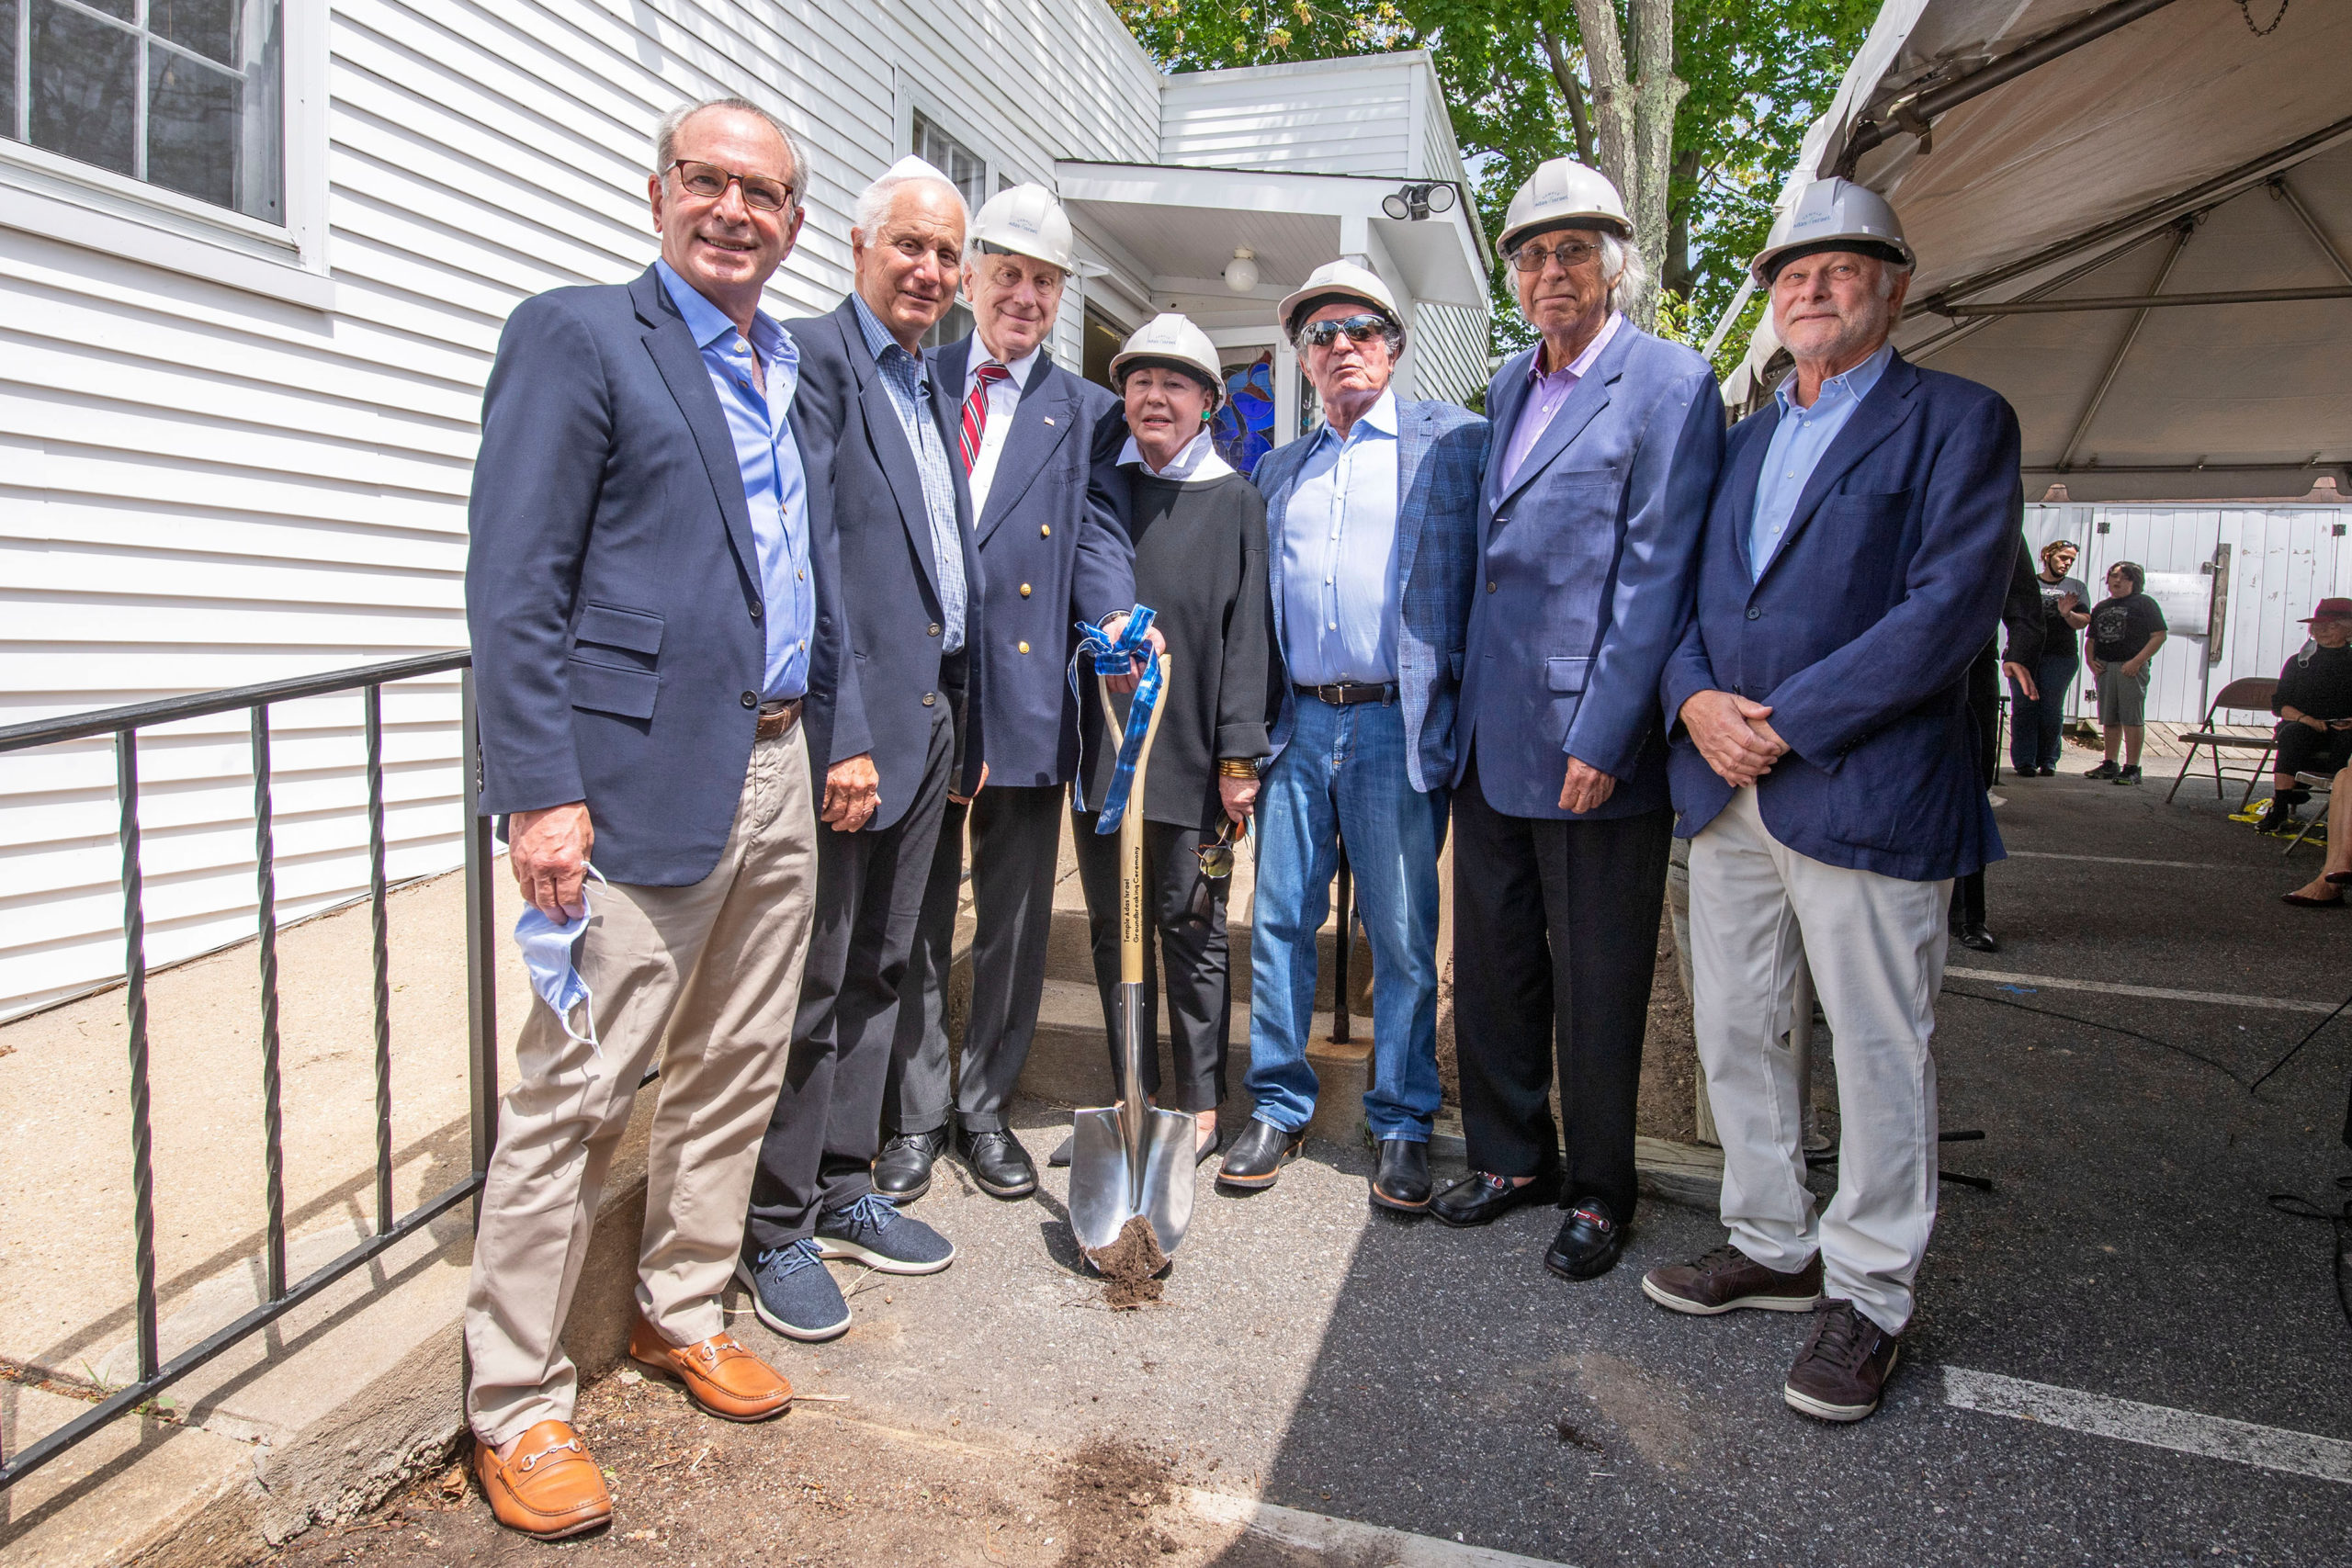 A groundbreaking ceremony for a new addition to the temple that was held in the parking lot of the temple on Sunday morning.    MICHAEL HELLER